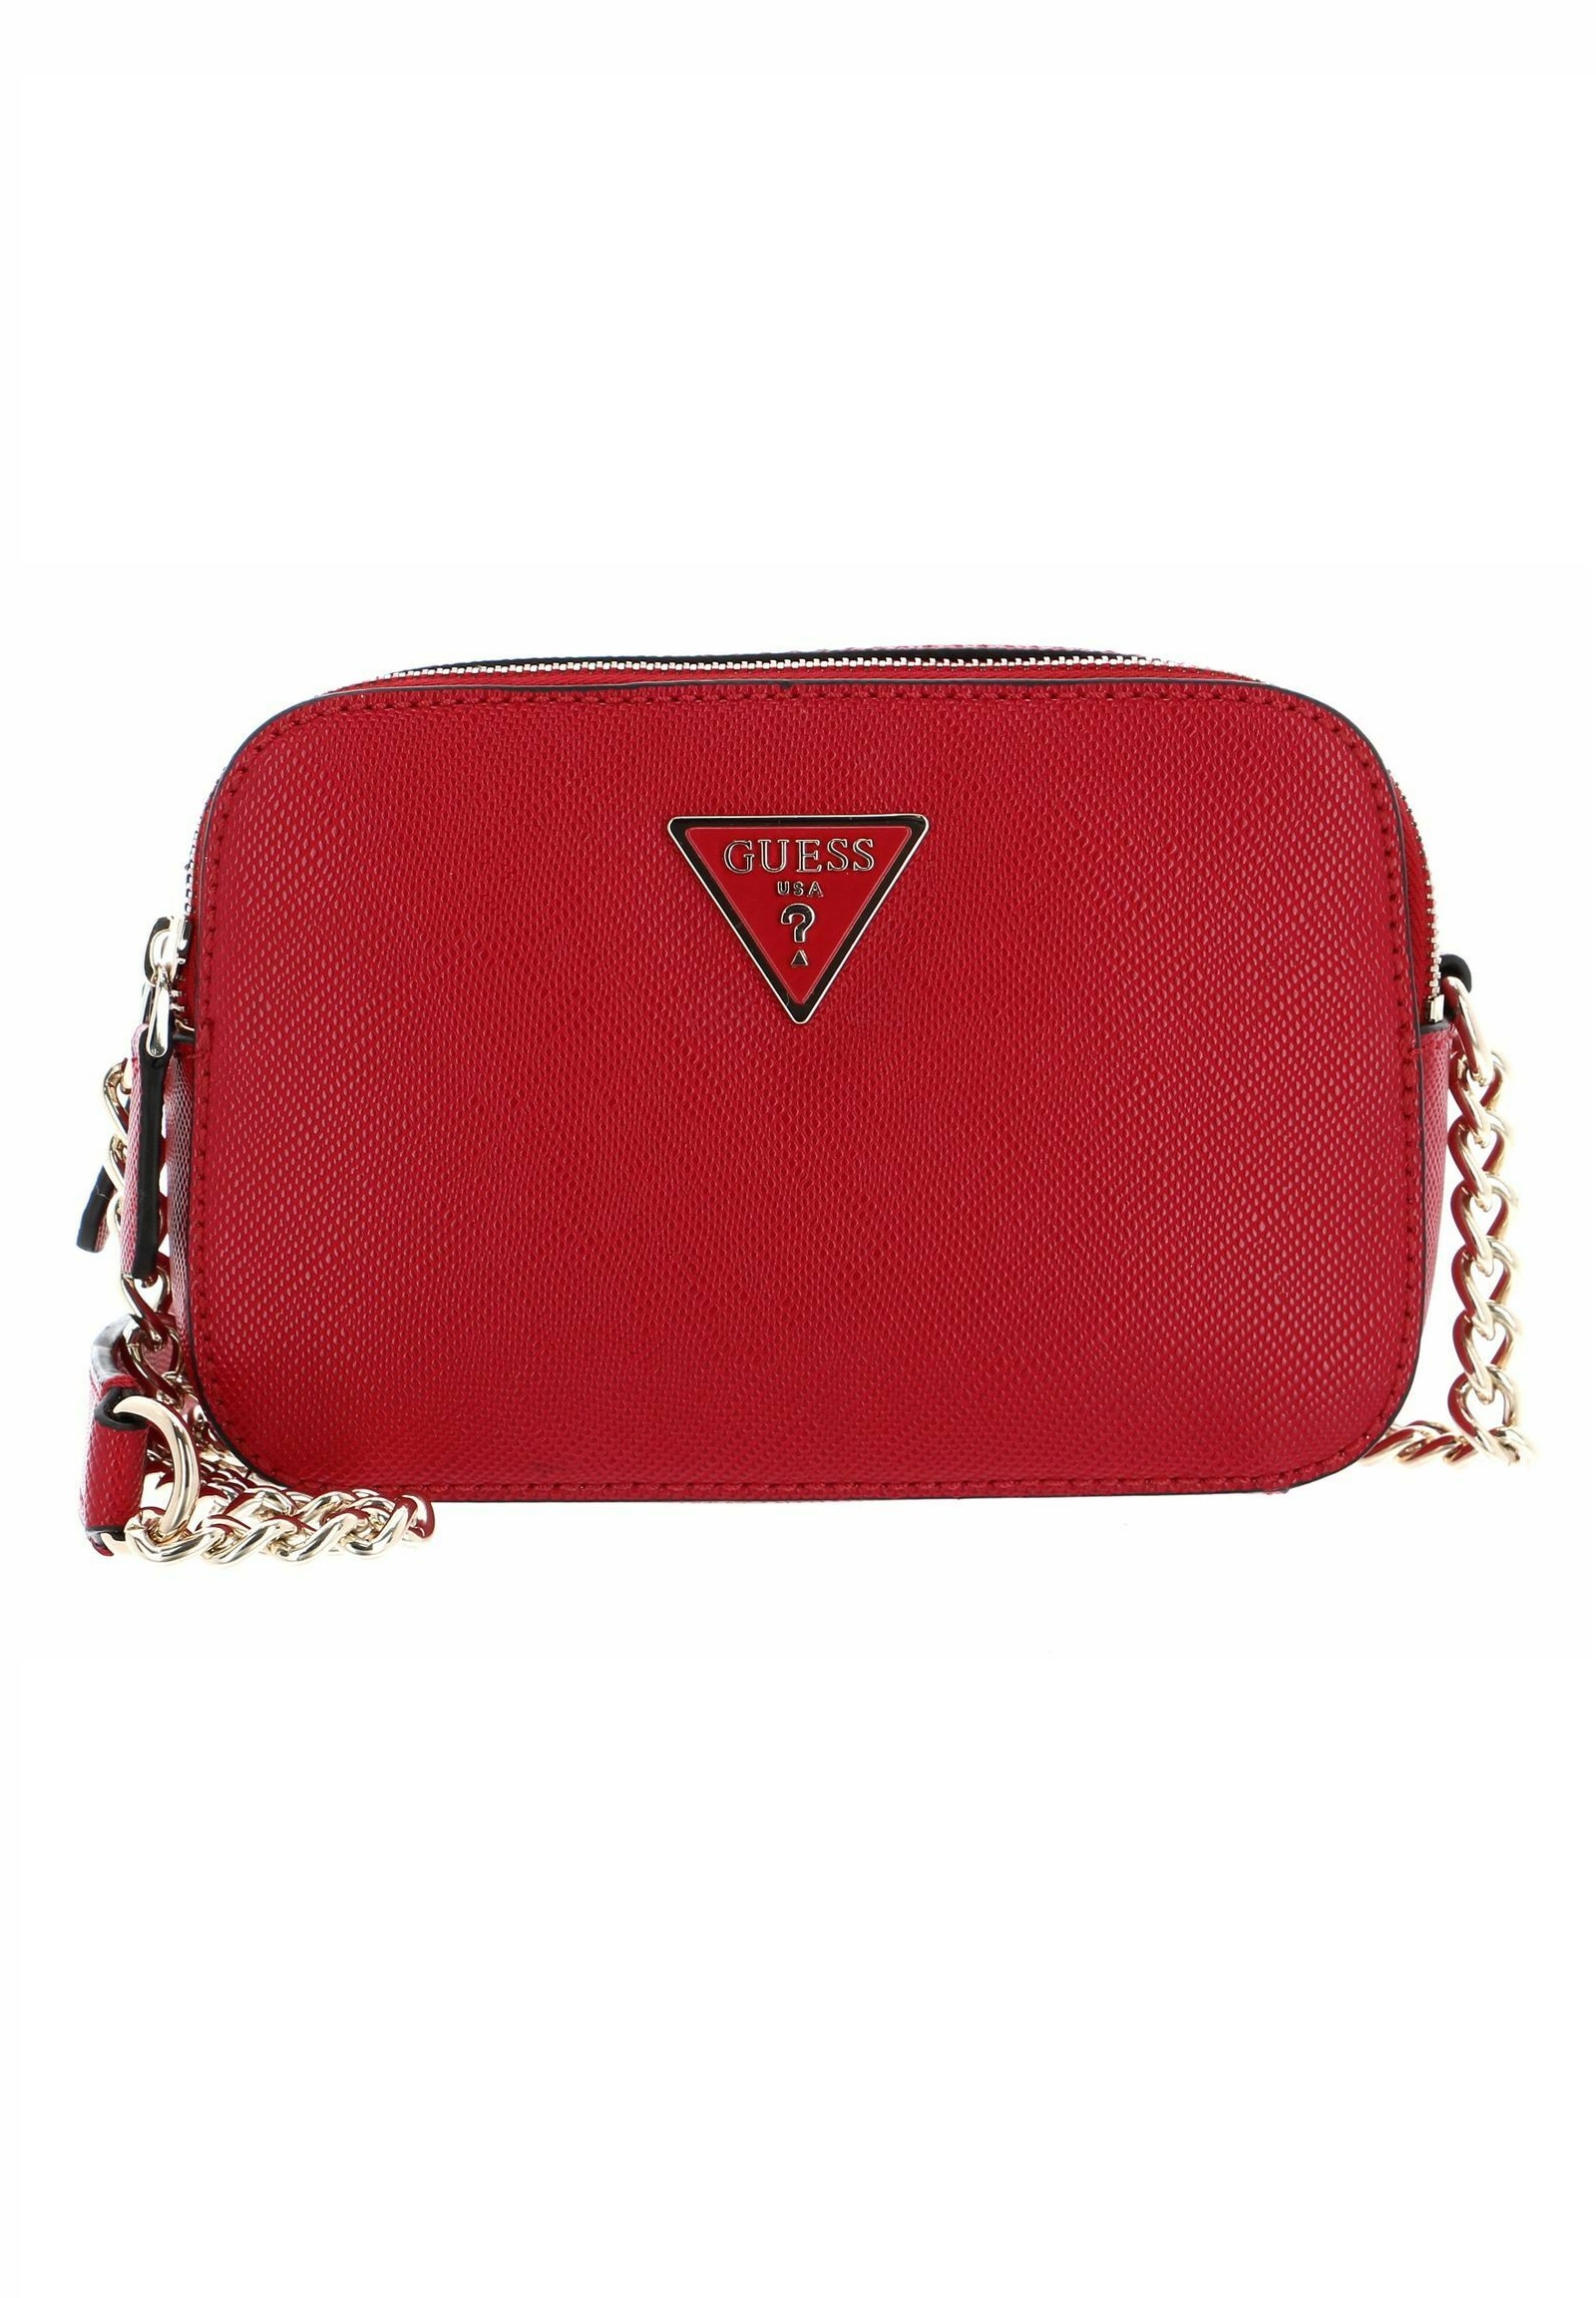 GUESS BORSA ZG787914 RED NOELLE DONNA